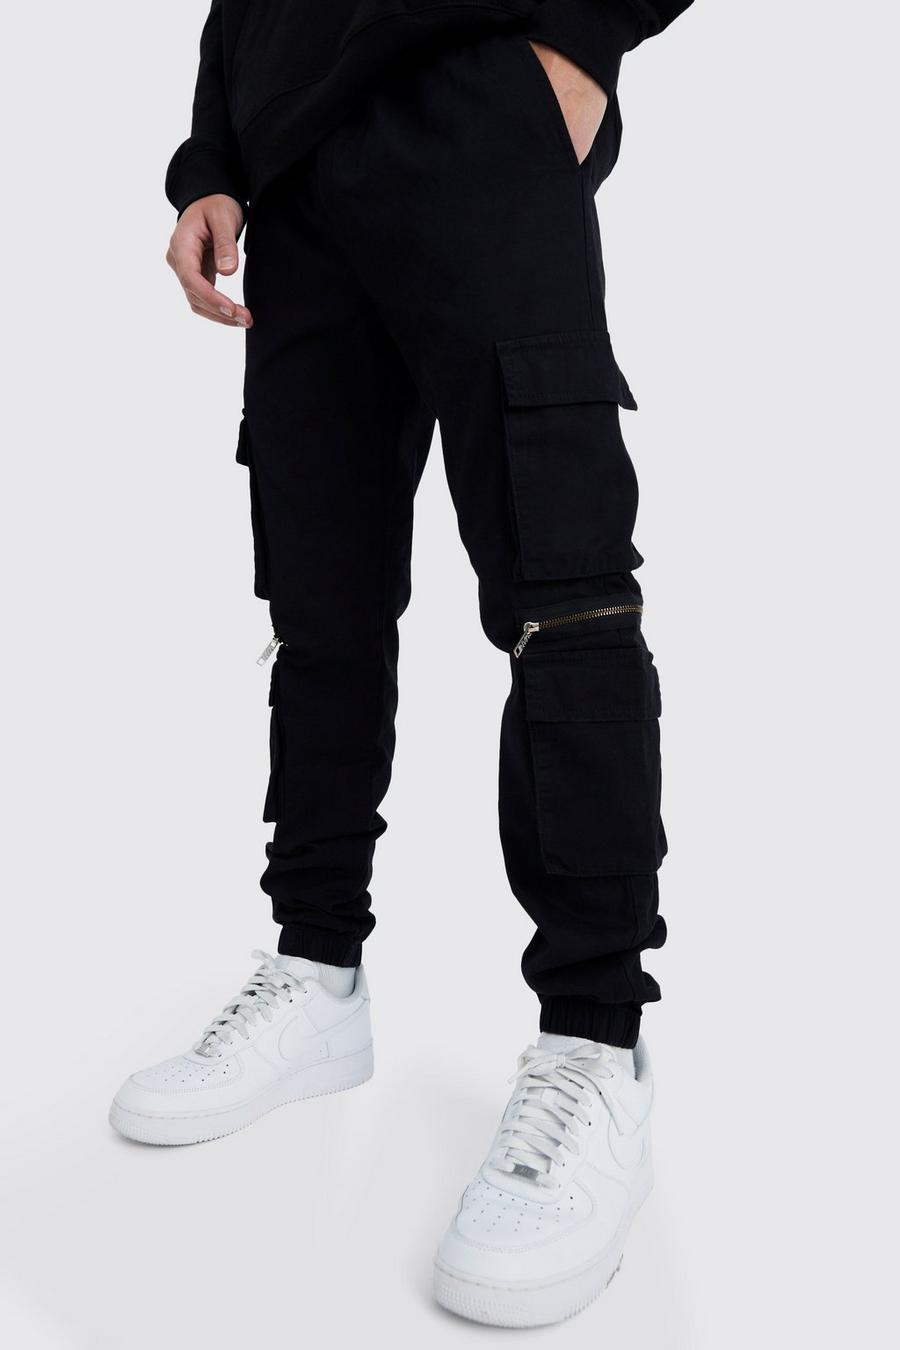  ZCVBOCZ Cargo Pants for Men Loose Fit Outdoor Multi-Pockets  Trousers Drawstring Elastic Waist Straight Type Sports Pants : Clothing,  Shoes & Jewelry